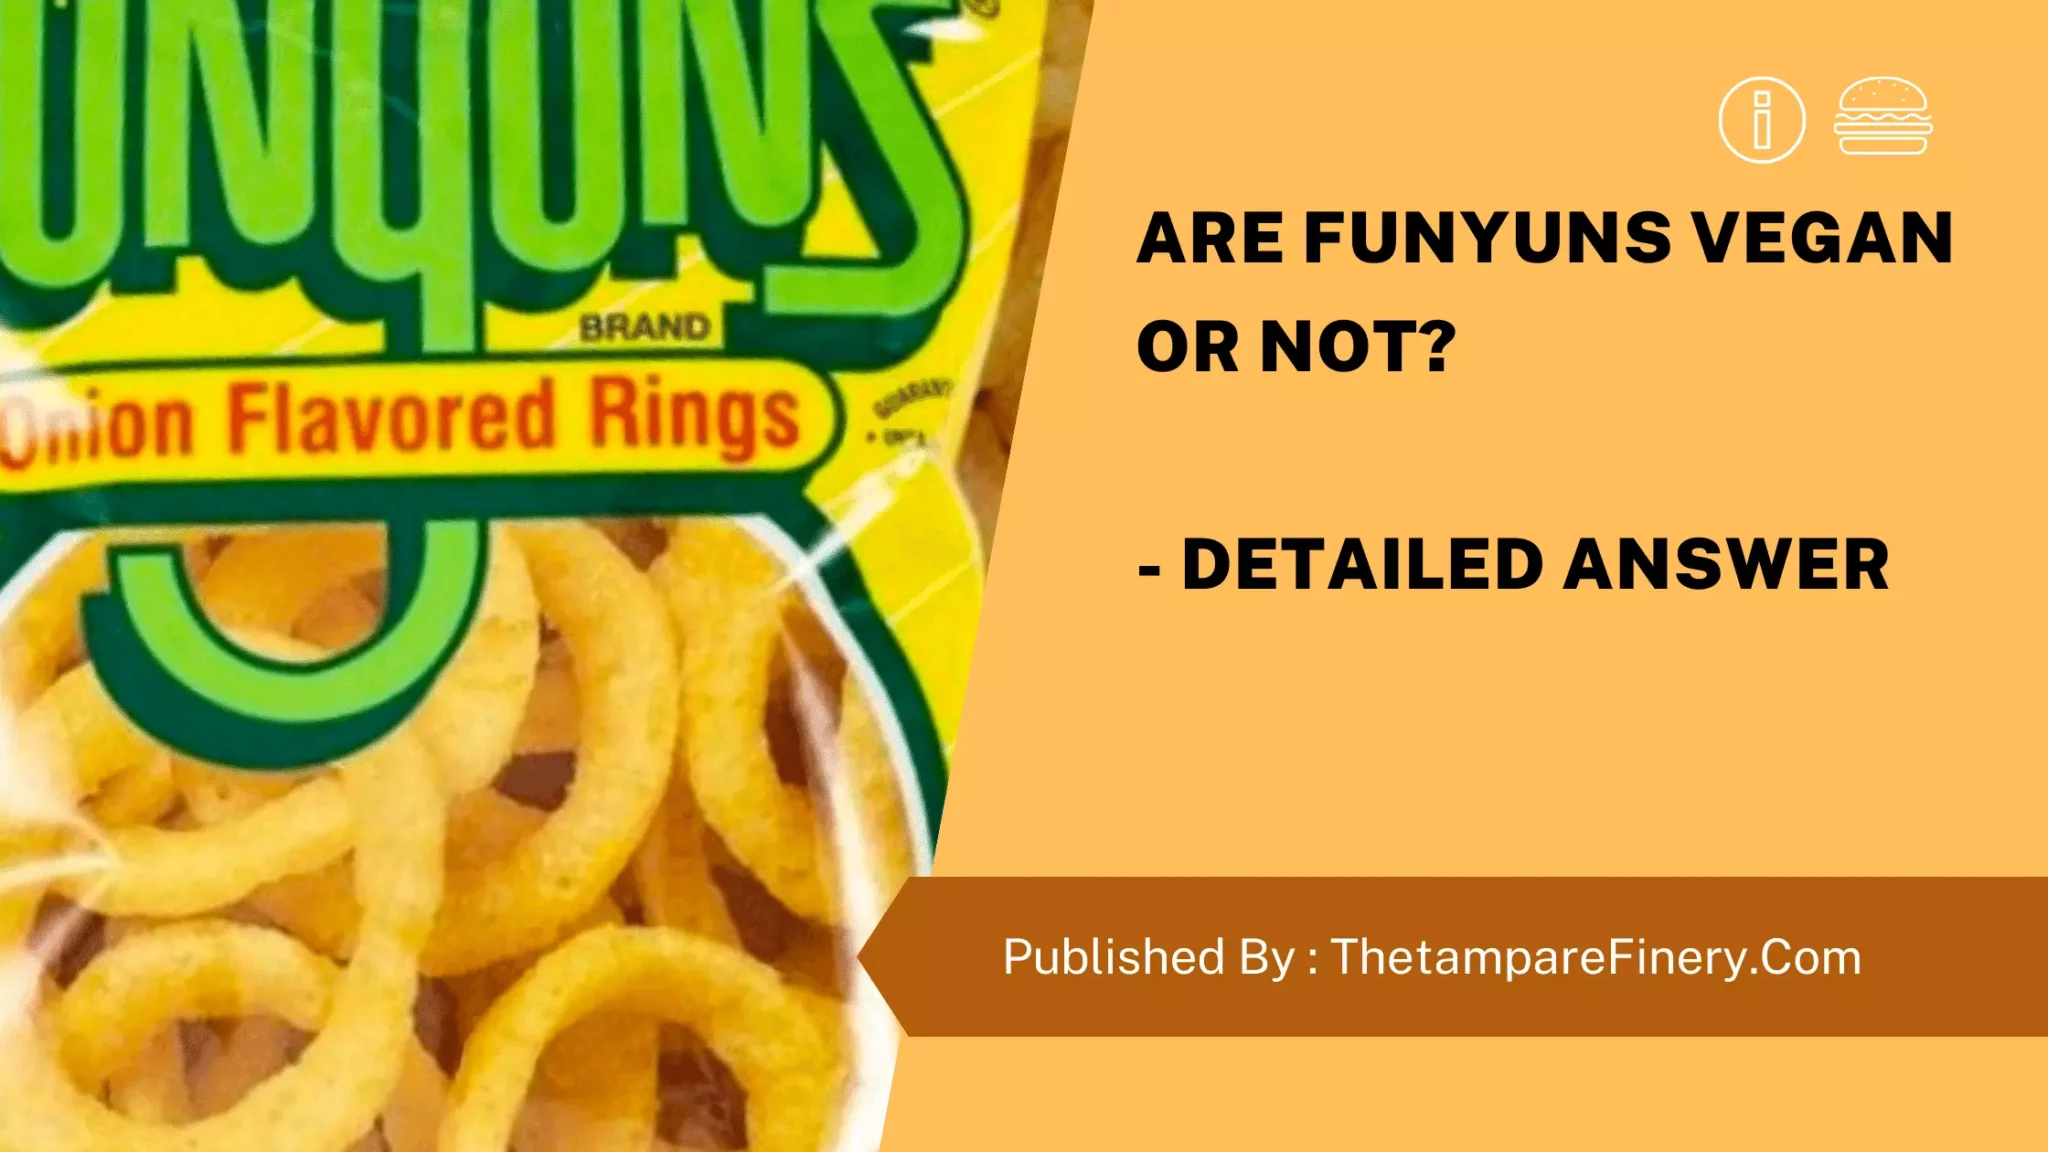 Are Funyuns Vegan or Not